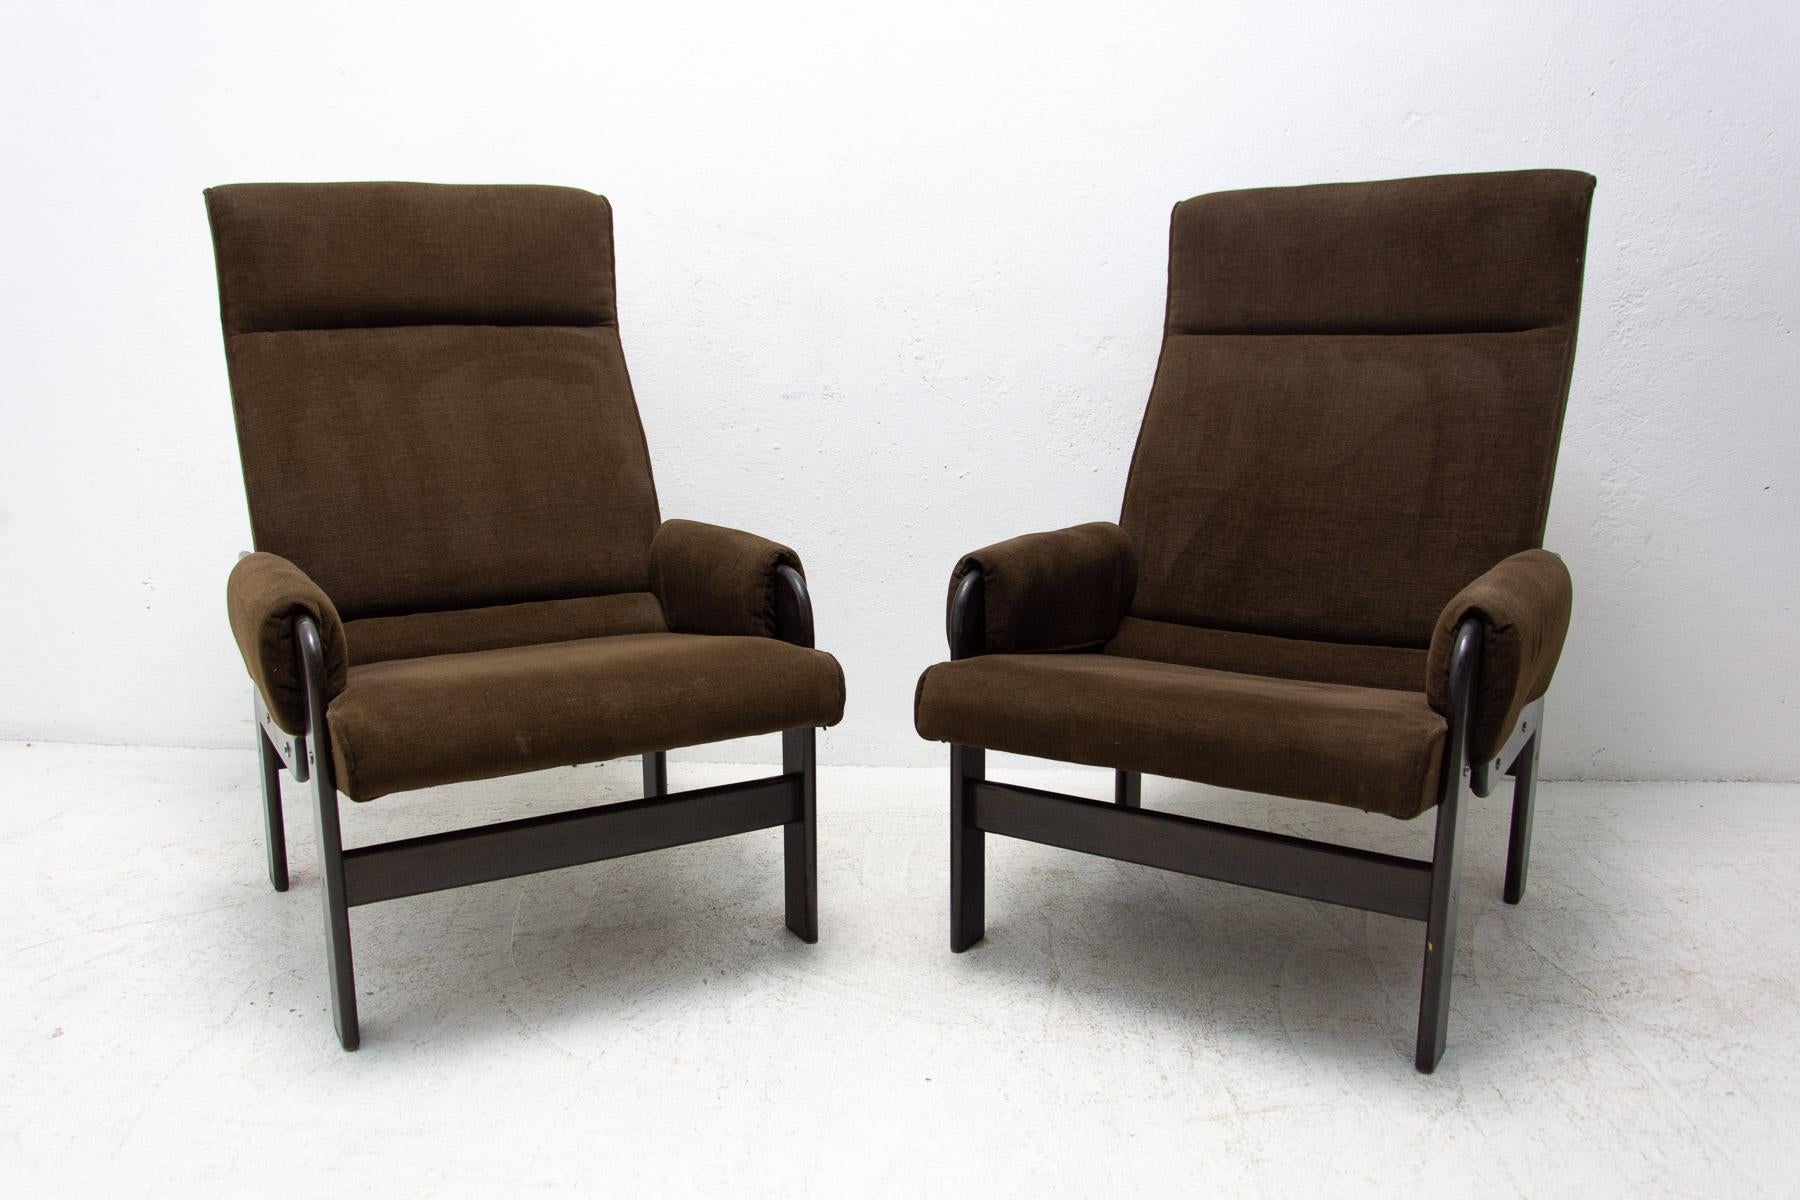 This mid-century scandinavian style armchairs were made in the 1970's.

It is upholstered in fabric. The structure is made of wood. The chairs are in very good Vintage condition without any damage.

Price is for the pair.

Dimensions of the